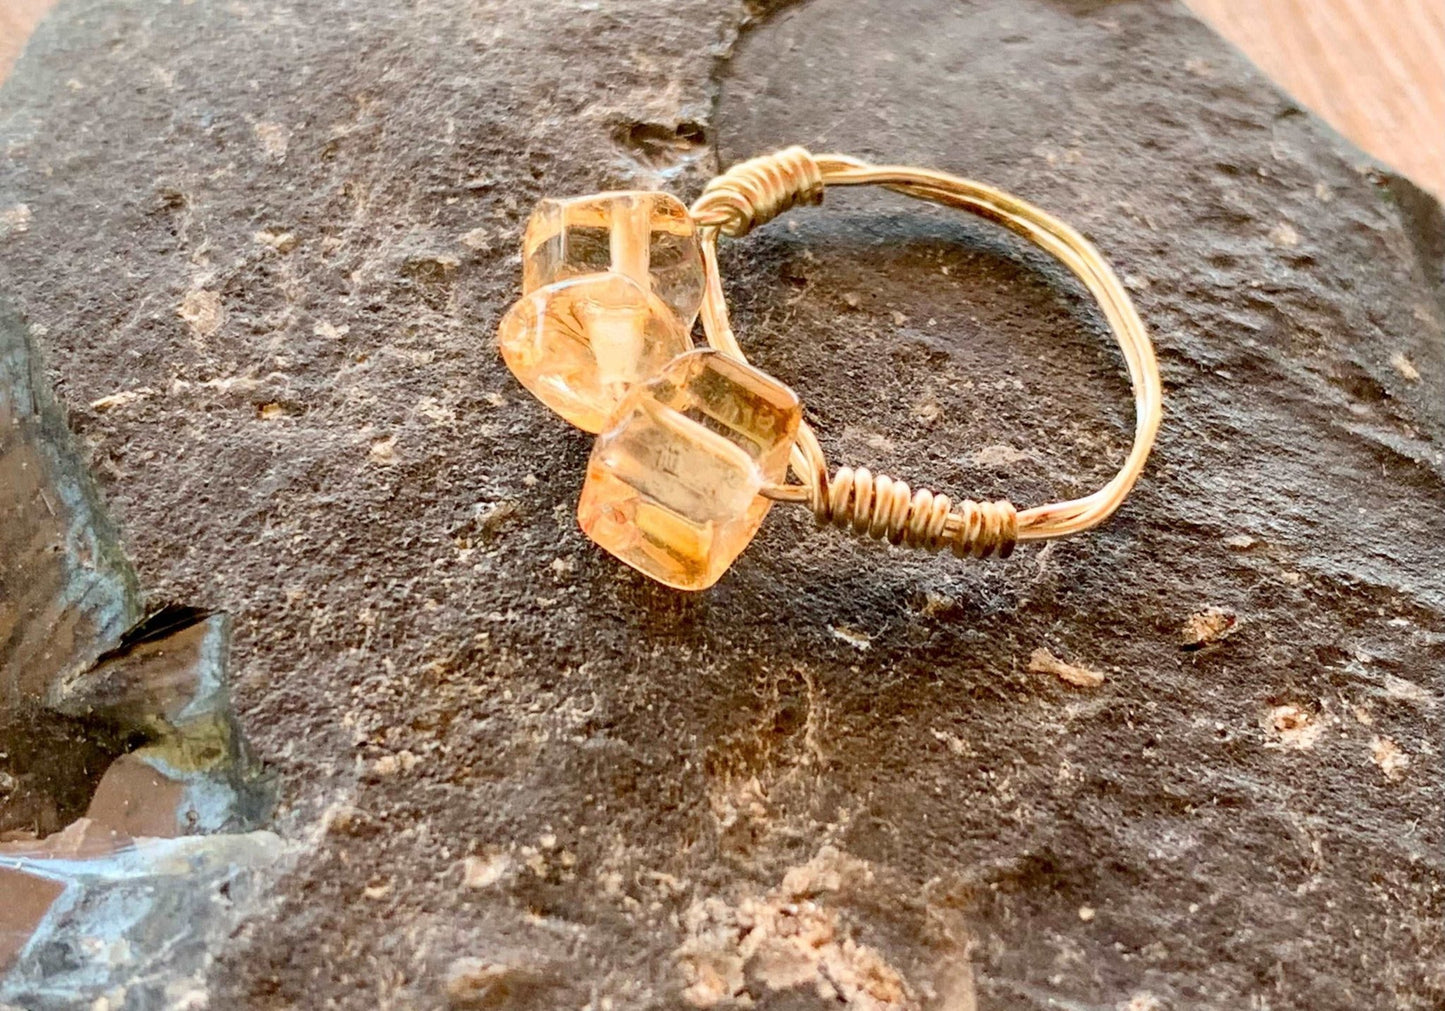 Handmade Genuine Citrine Wire Wrapped Ring Size 6.5